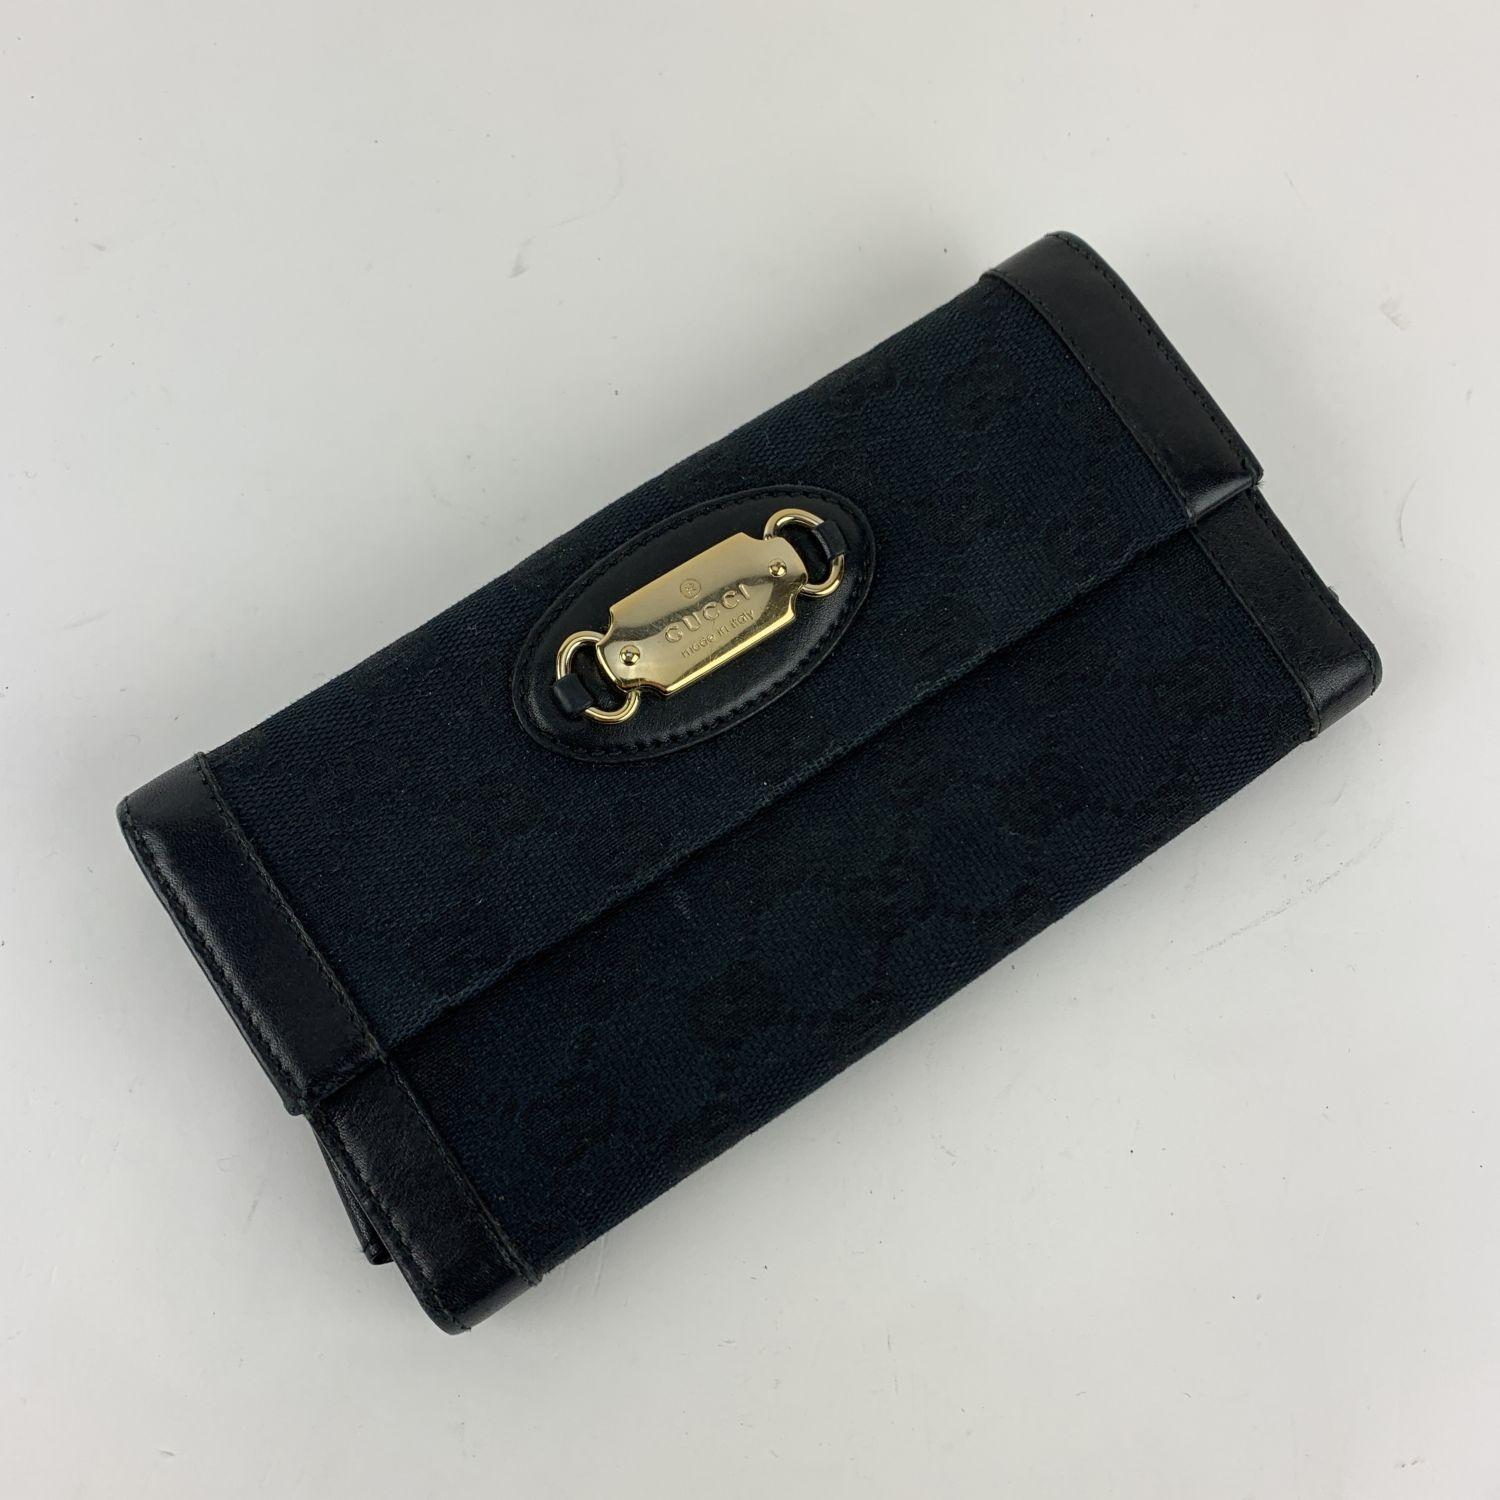 GUCCI black continental 'Punch' wallet in monogram canvas and leather. Flap with button closure on the front. Gold metal Gucci plate on the front. Fold over strap with button closure on the back. 7 credit card slots, 1 bill compartment and 2 open